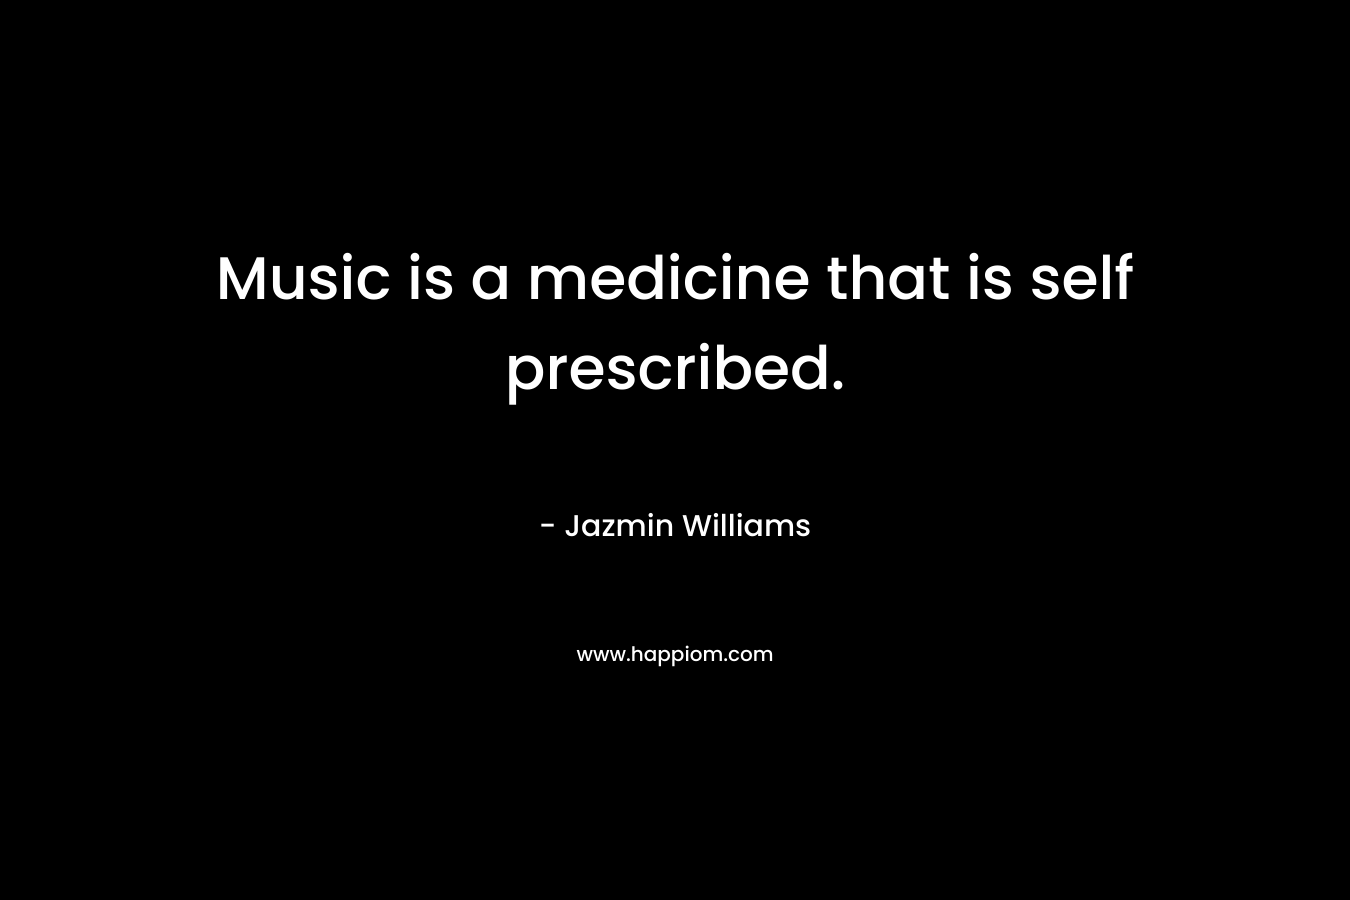 Music is a medicine that is self prescribed. – Jazmin Williams